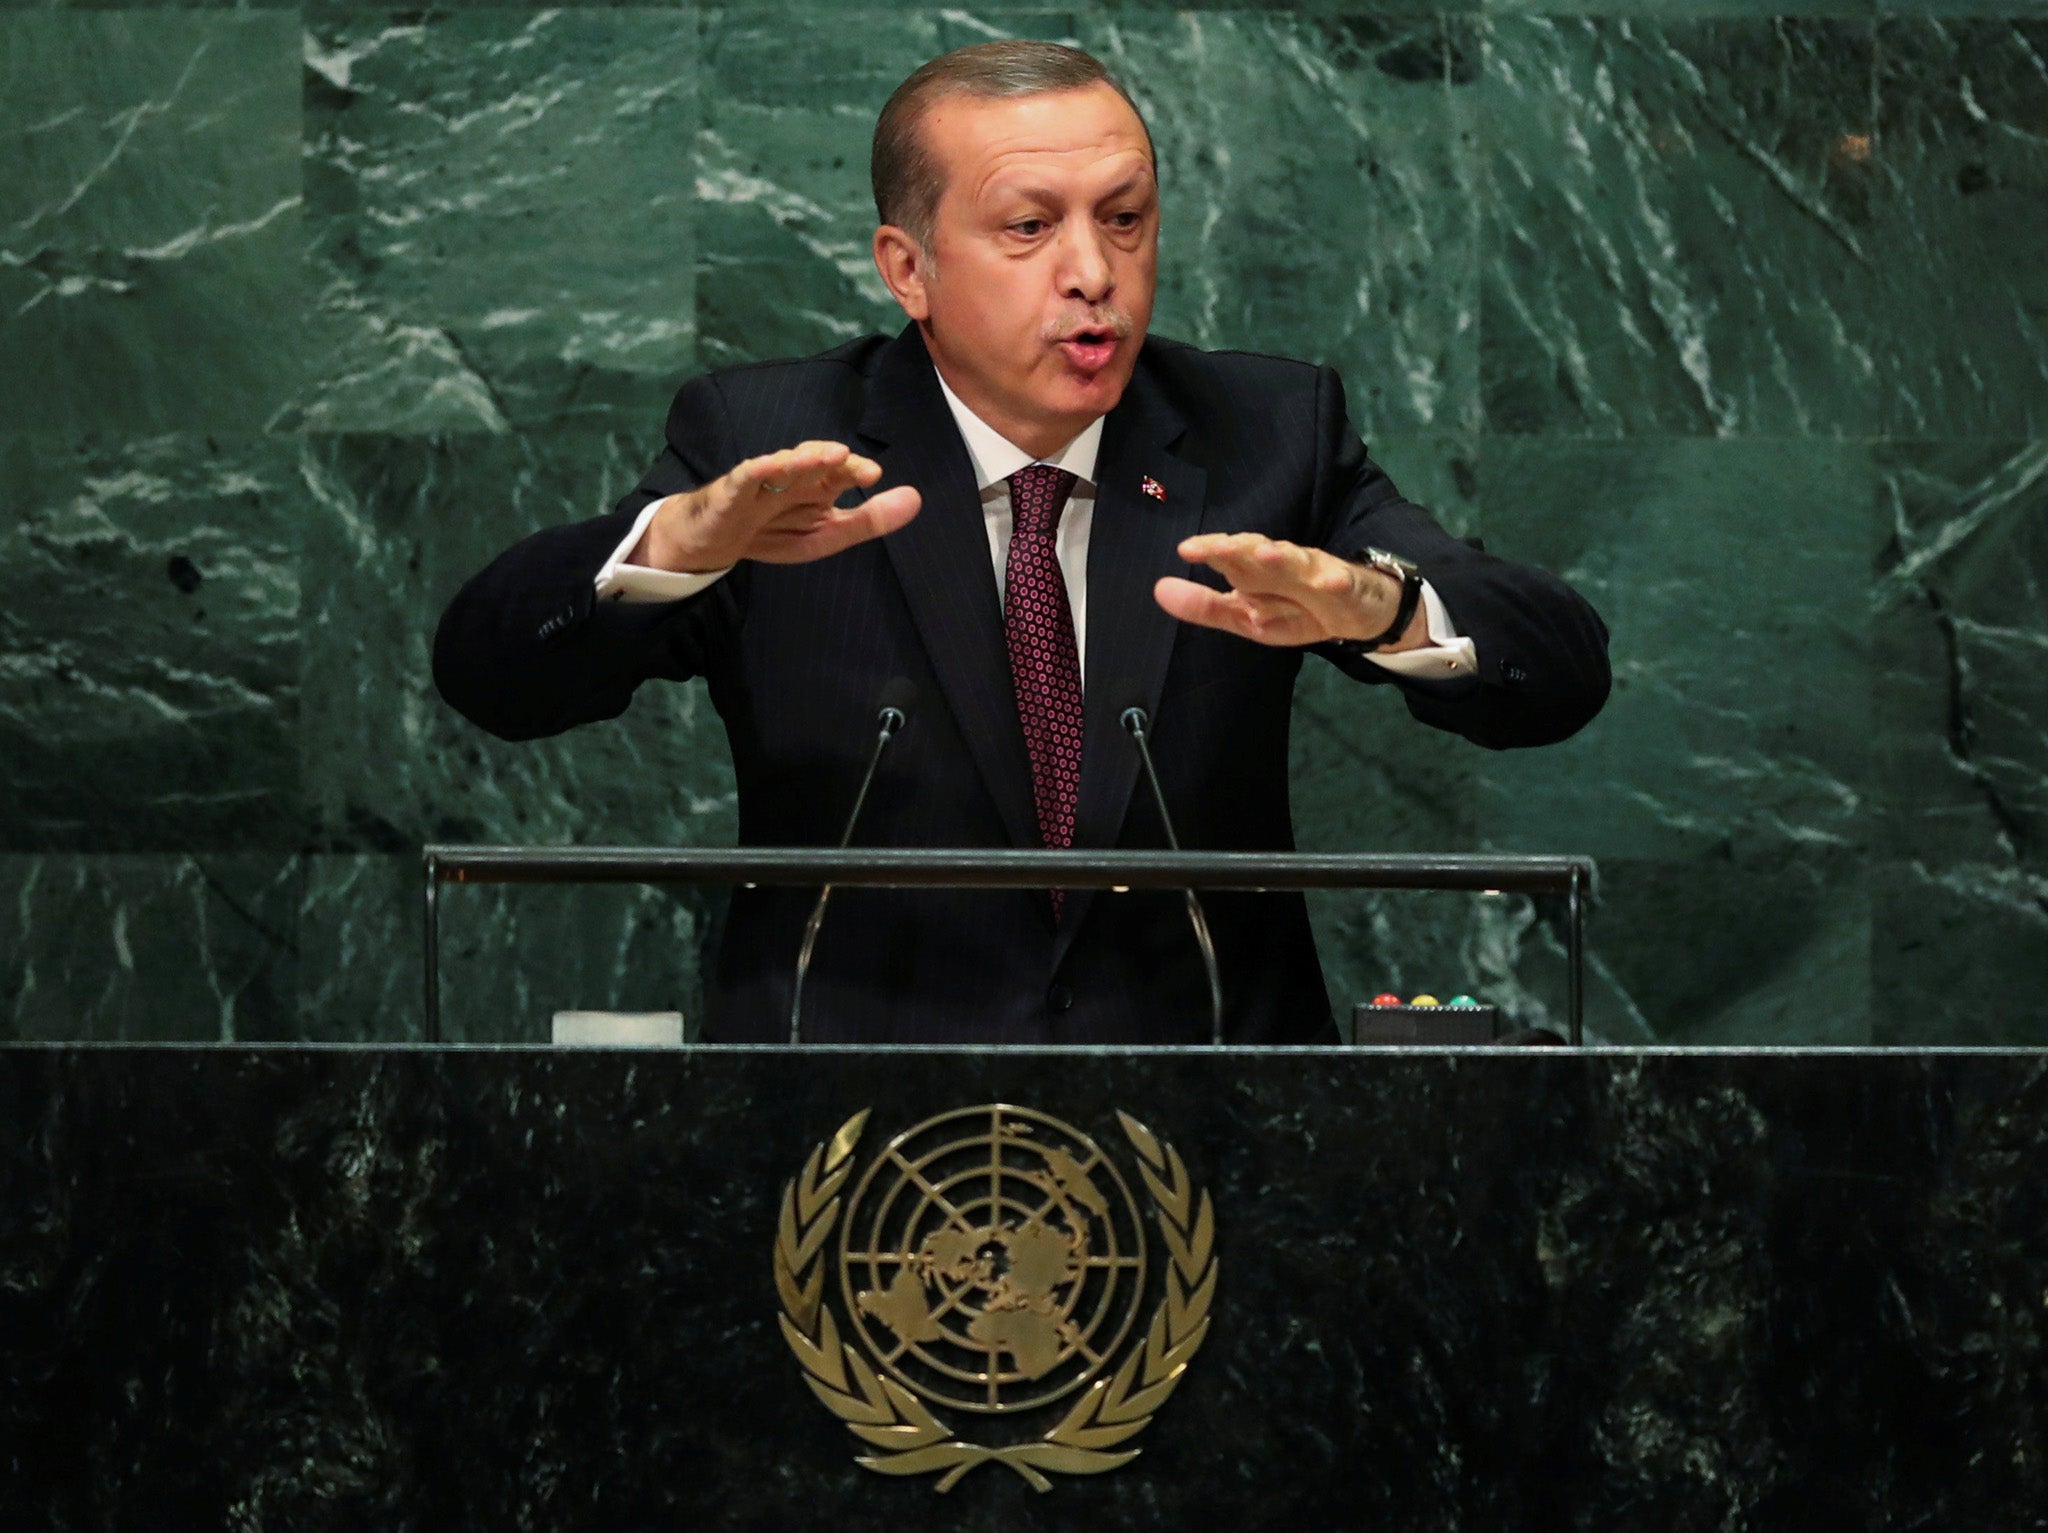 Turkish President Recep Tayyip Erdogan addresses the United Nations General Assembly in the Manhattan borough of New York